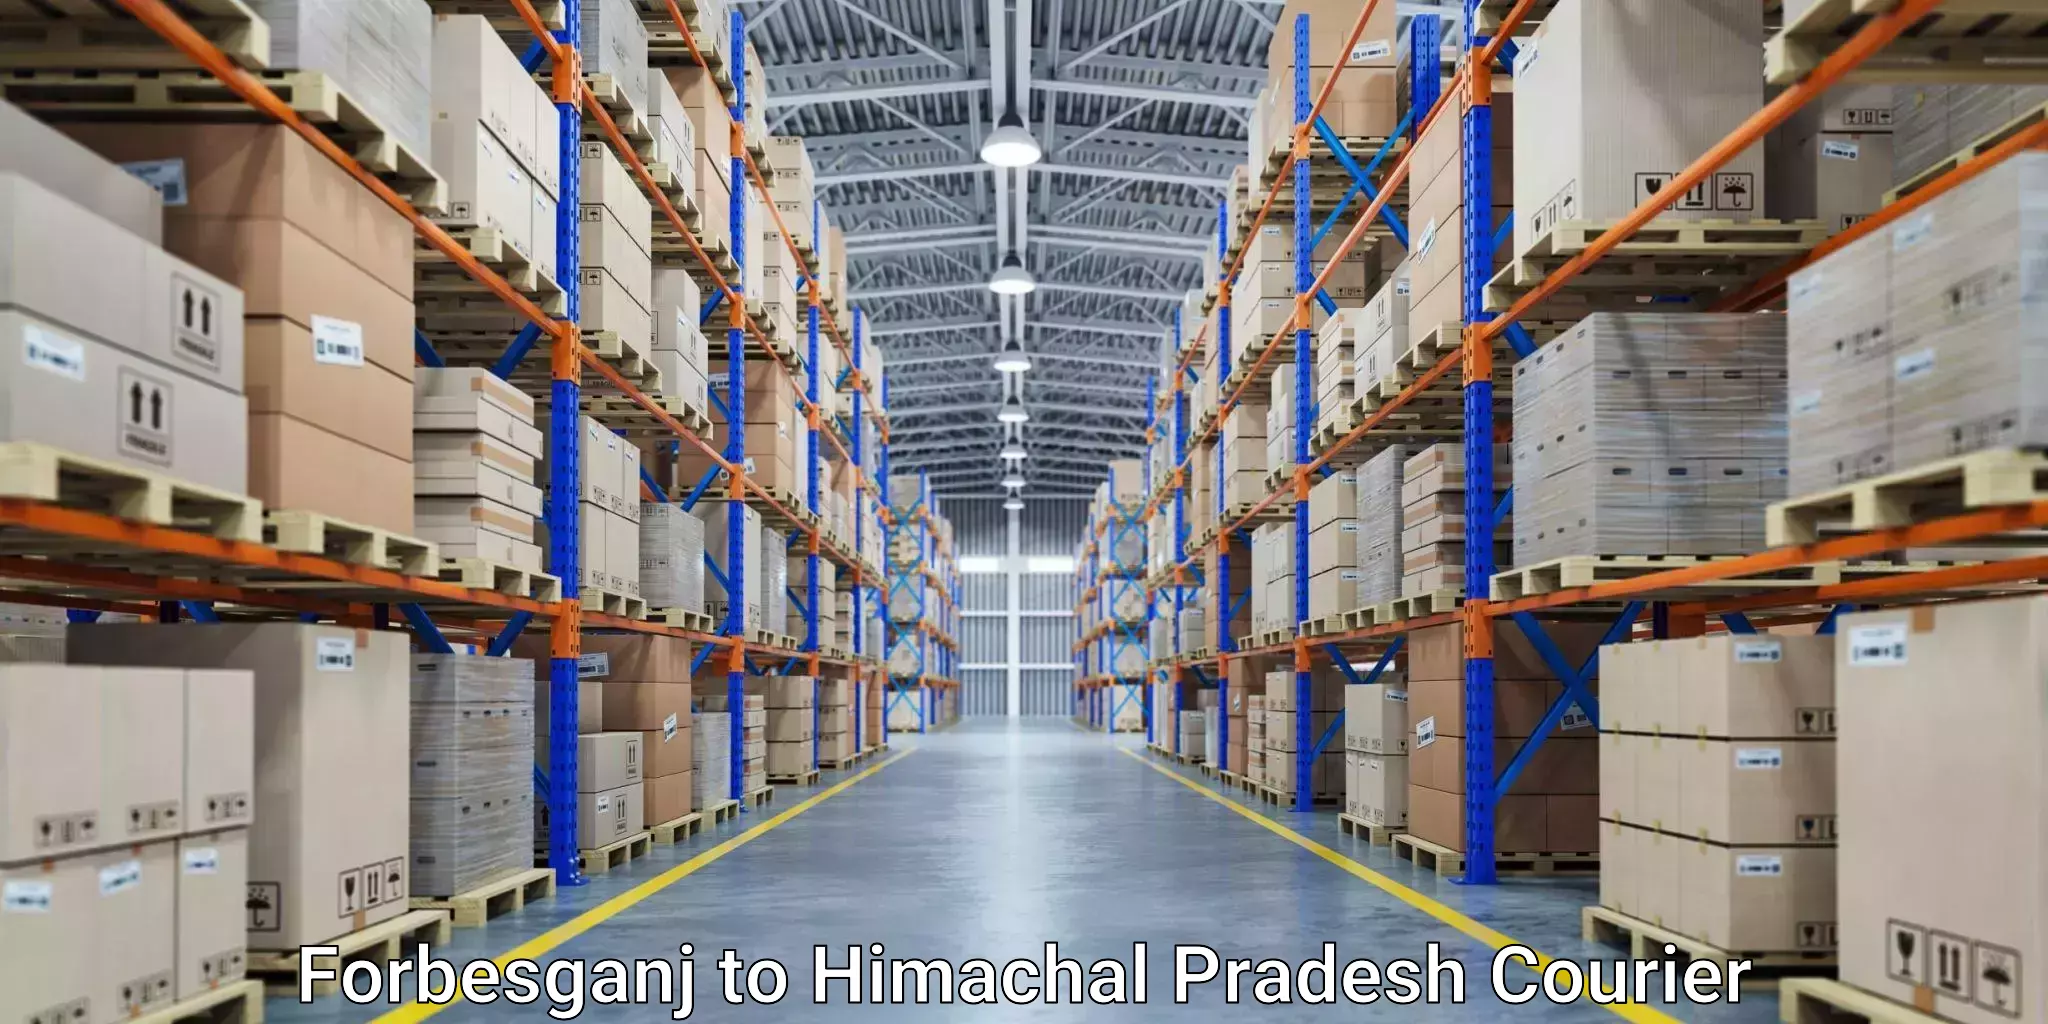 State-of-the-art courier technology Forbesganj to Himachal Pradesh